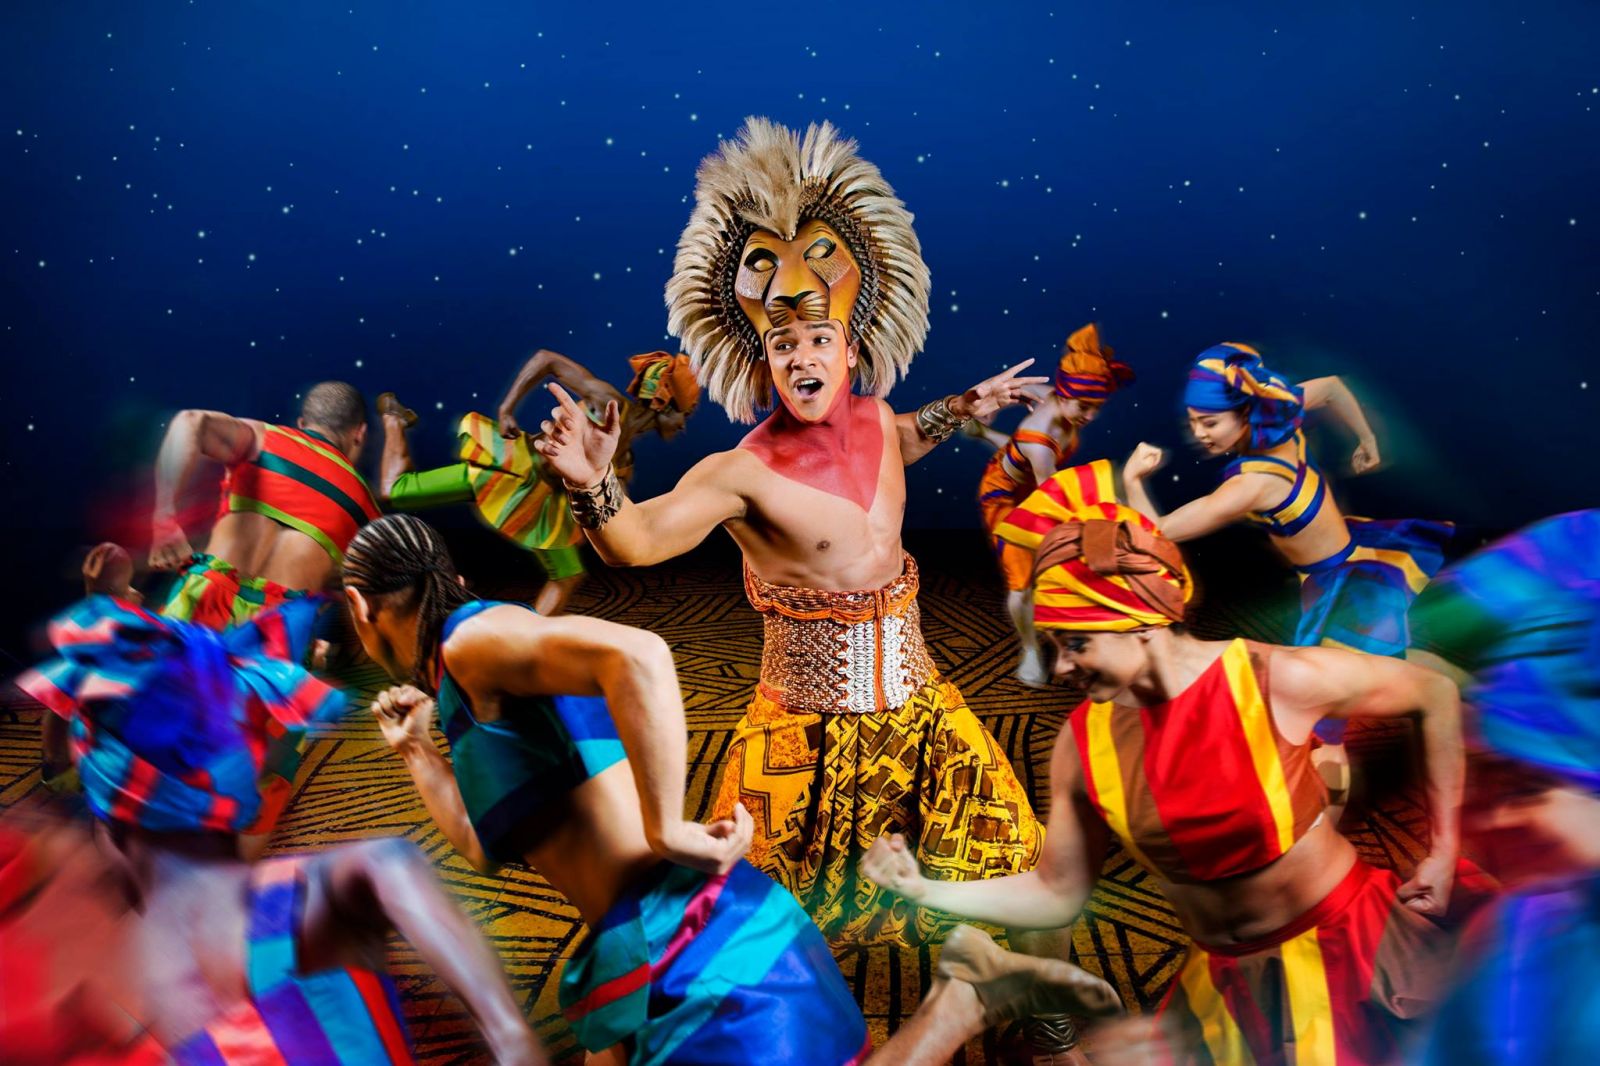 The Lion King is coming to Bristol!